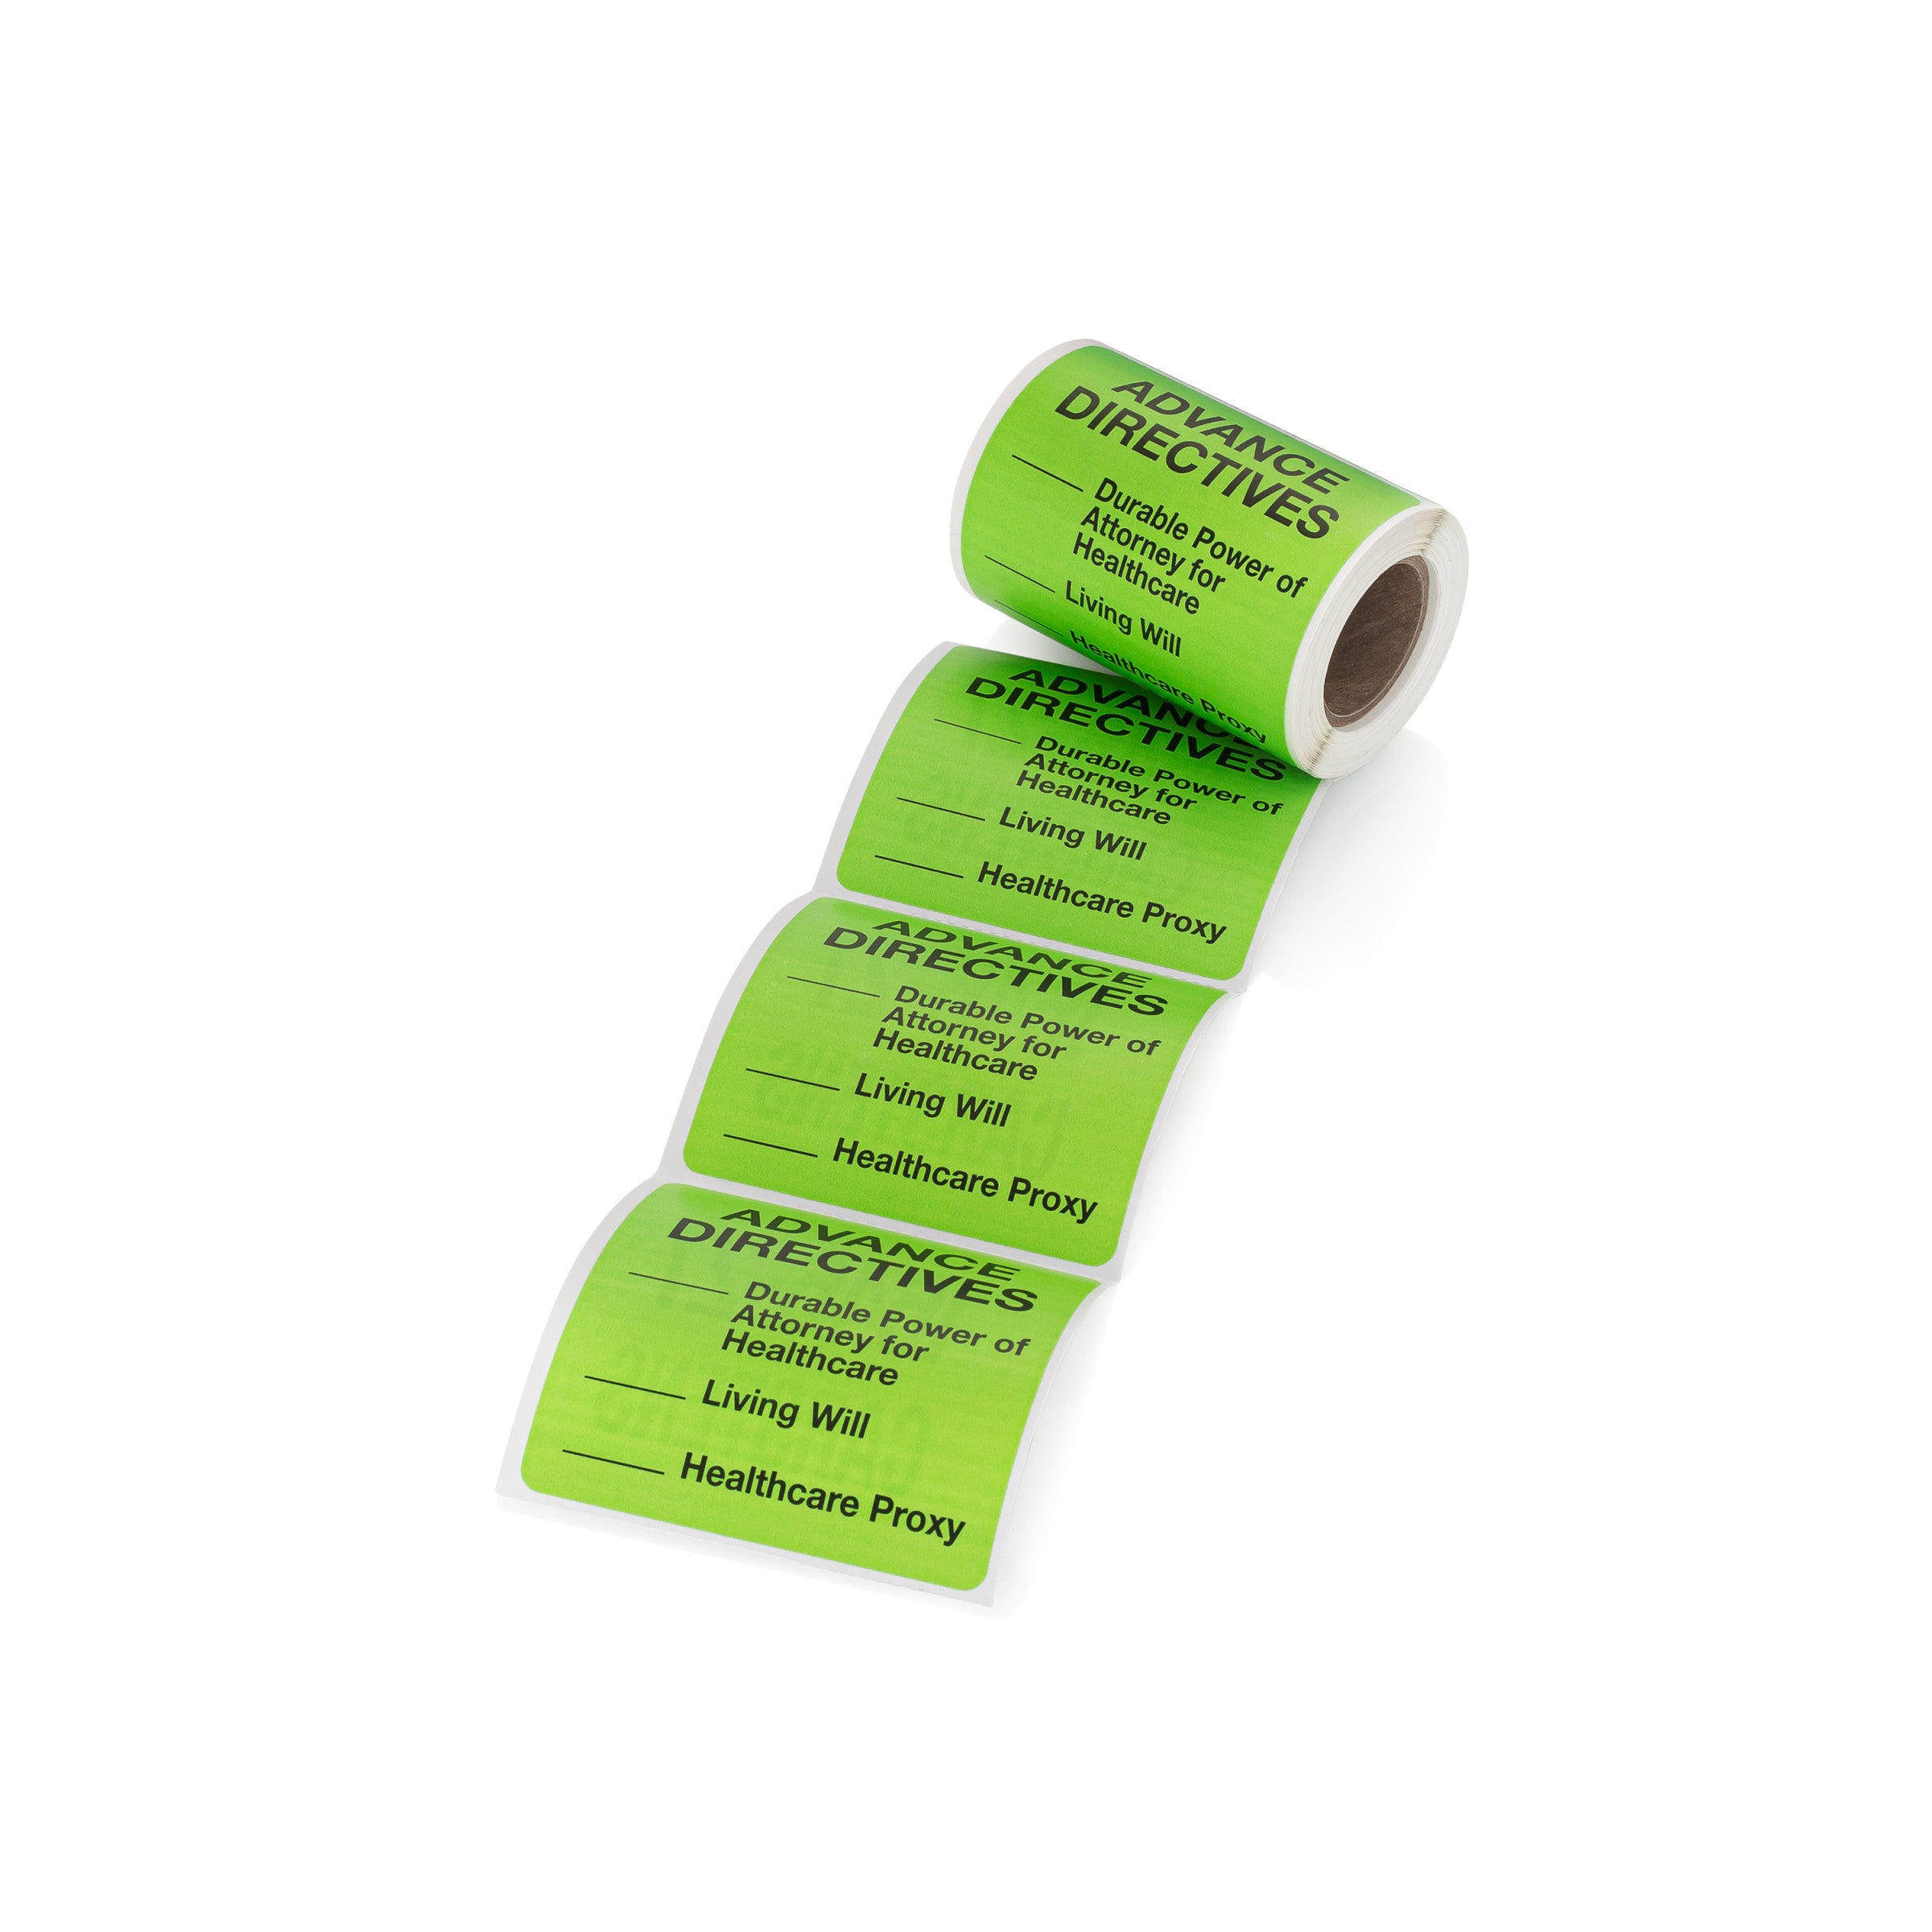 Advance Directives Alert and Instruction Label, Green, W2.5" x H.2.5" (Roll of 100)